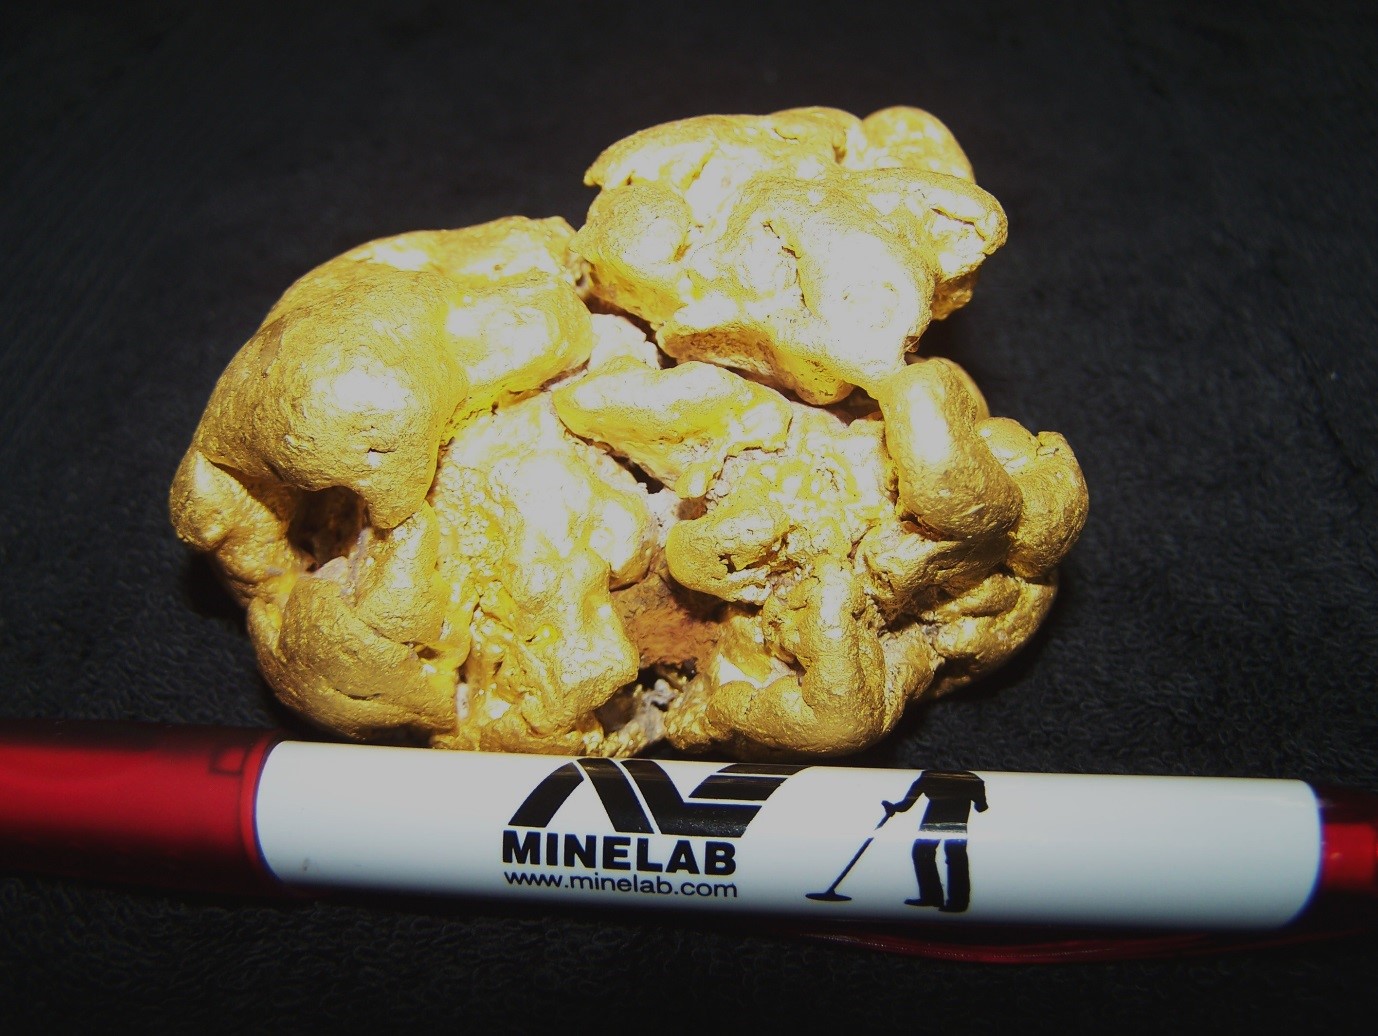 Gold nugget found with with GPX 5000